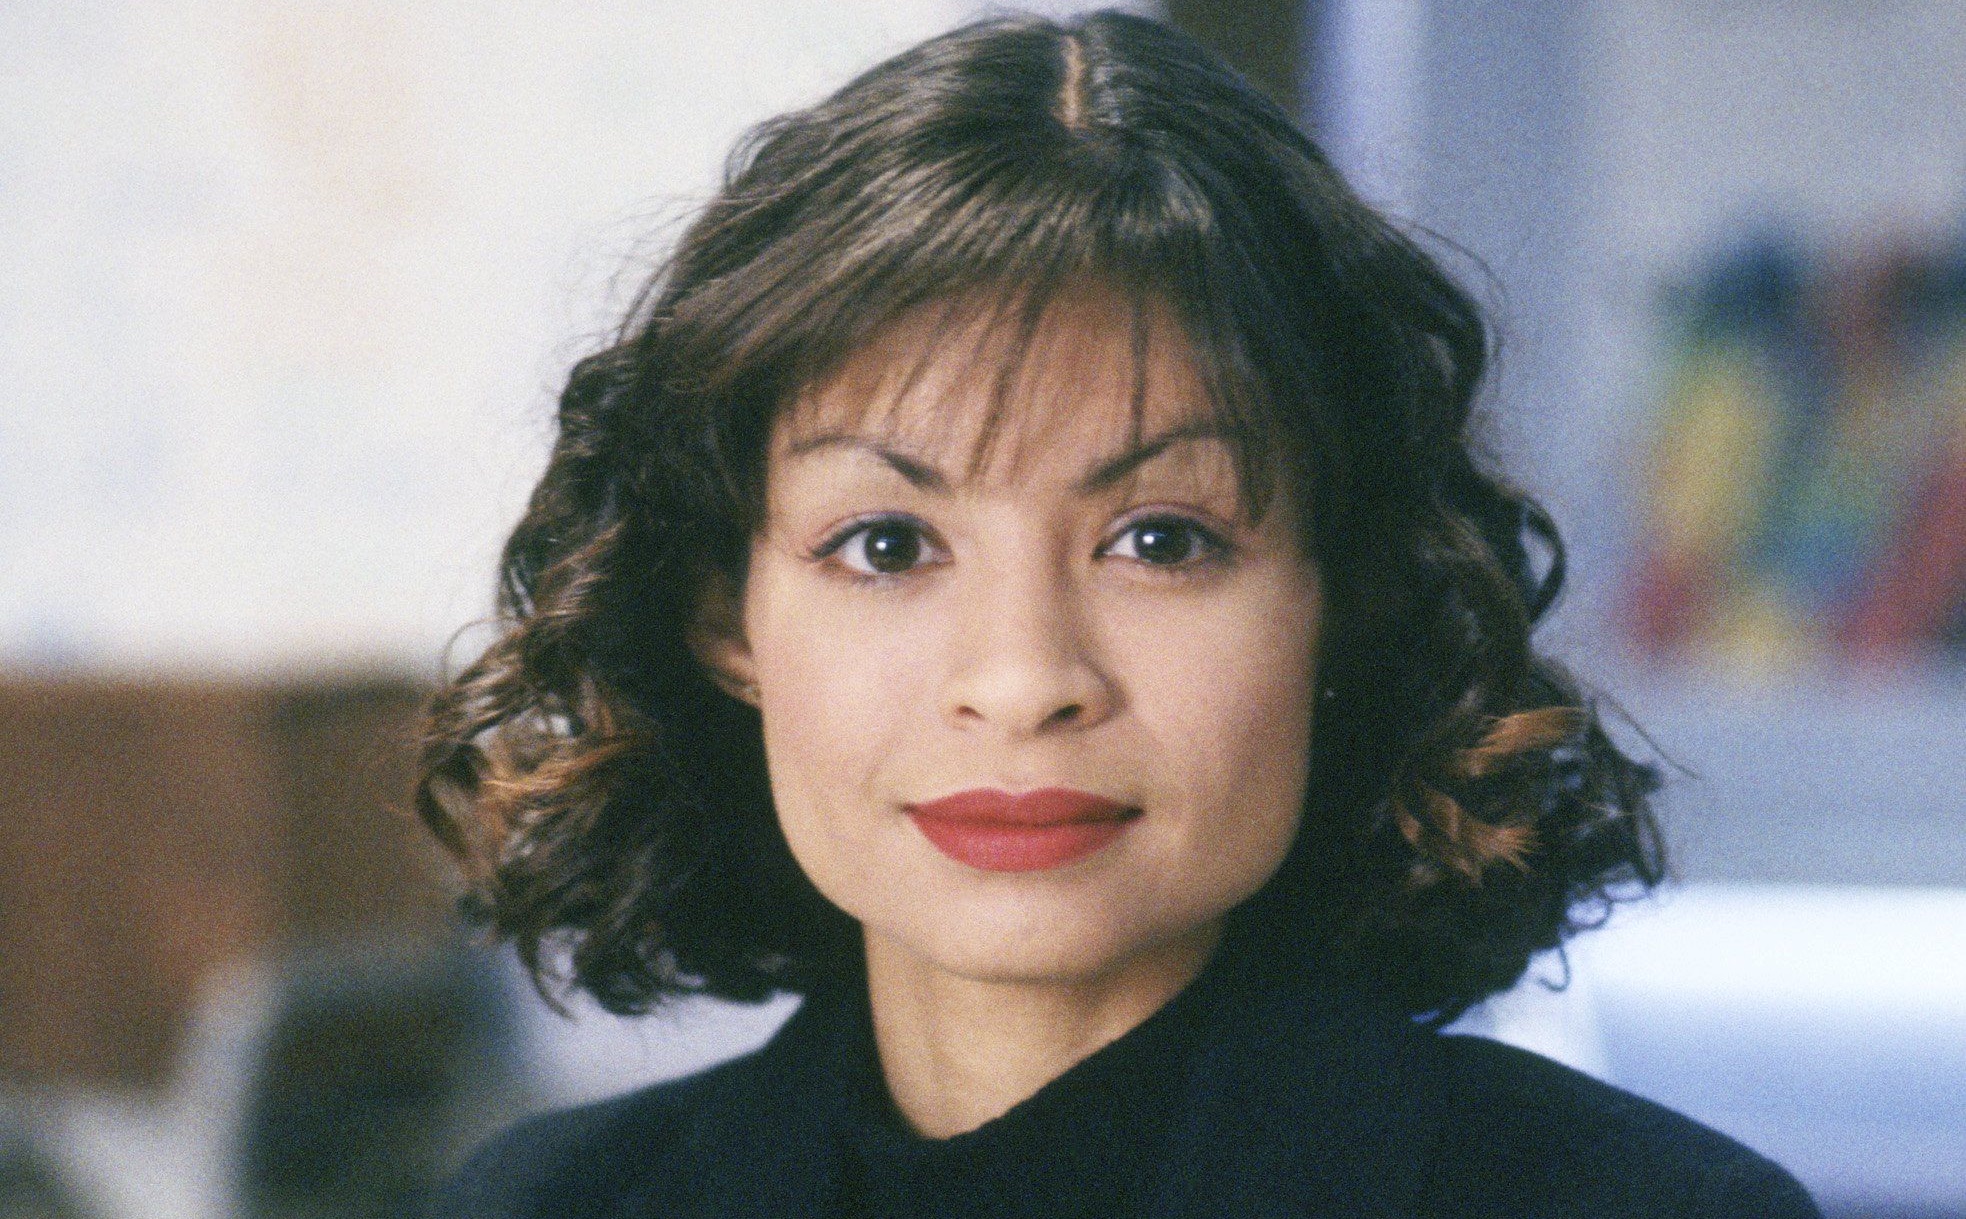 Er Actress Vanessa Marquez Was Shot Dead By Police In Lawful Self Defense Says Da As 1585